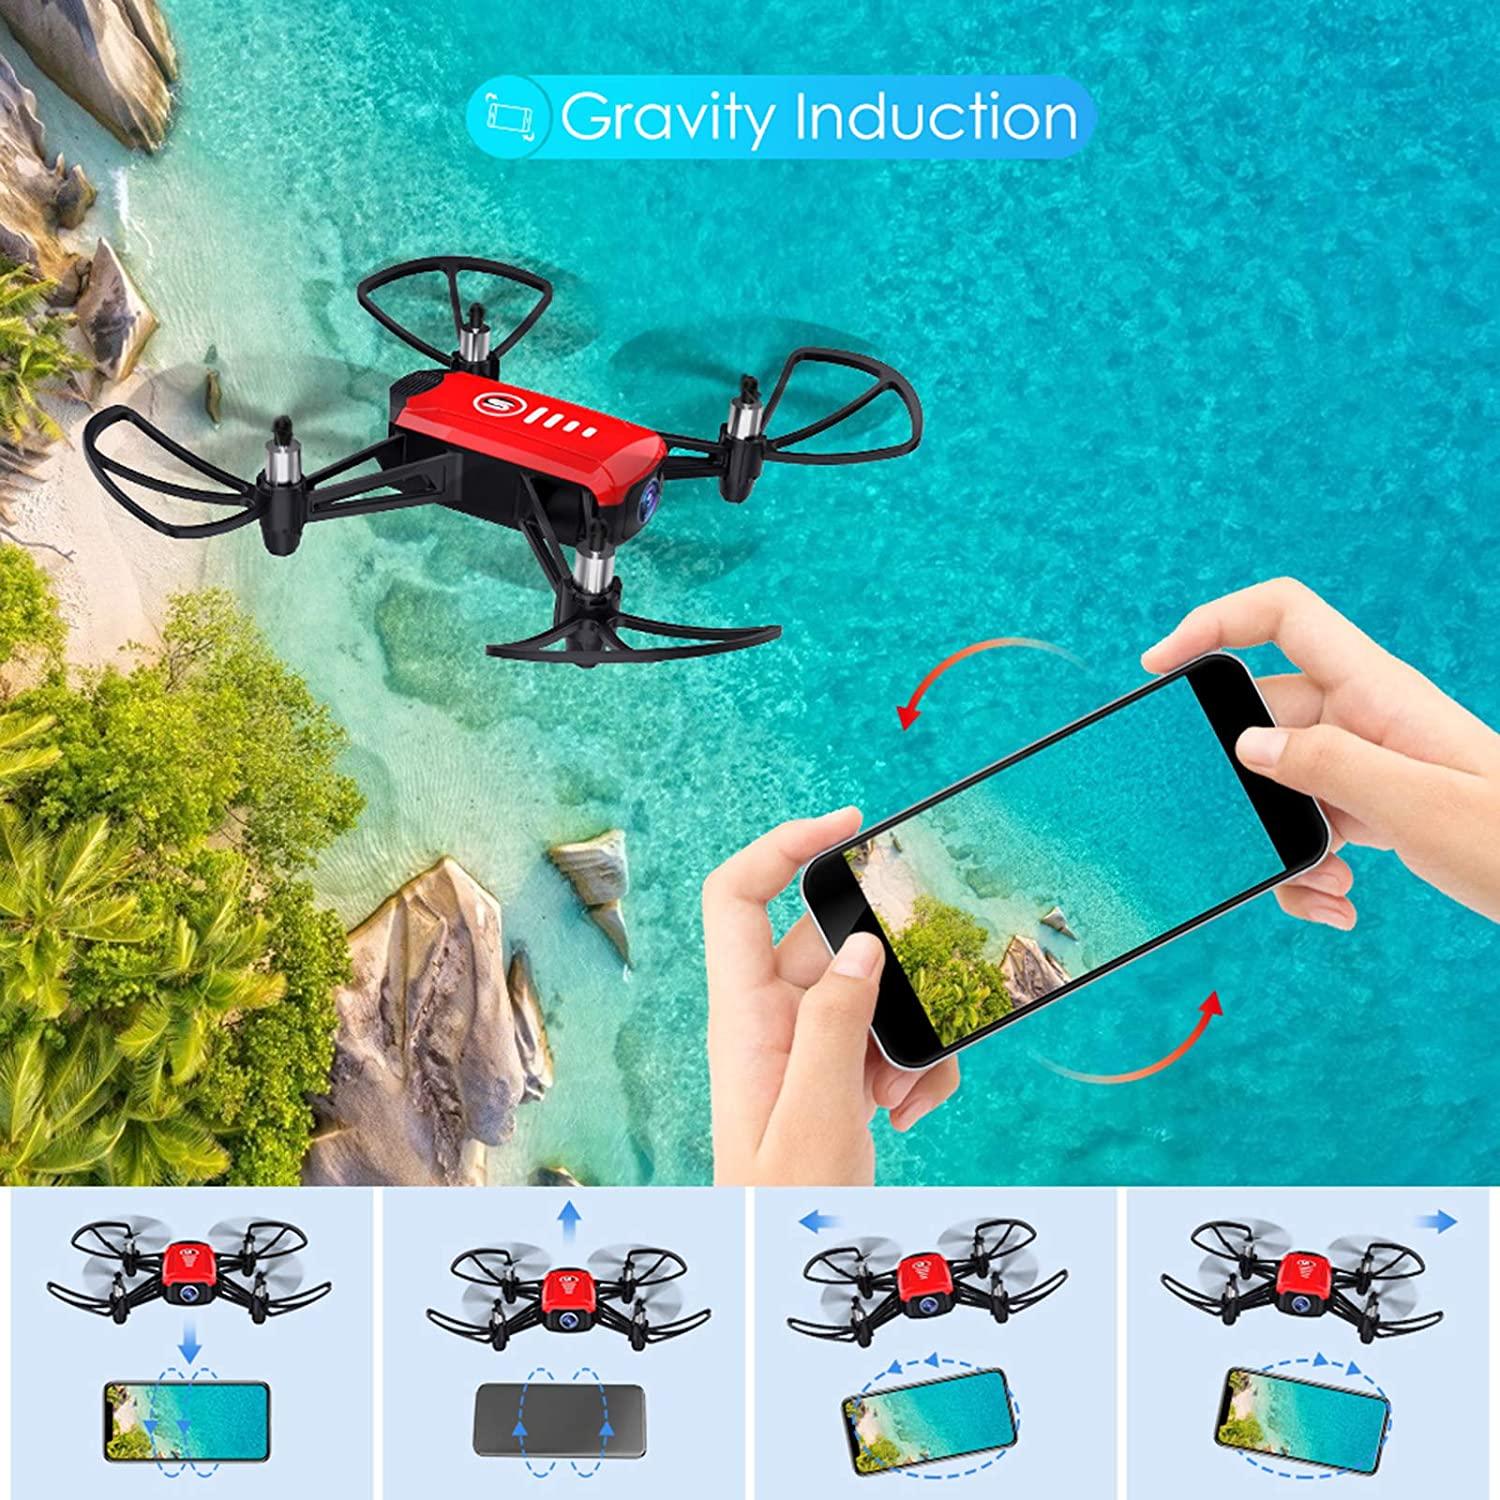 SANROCK H818 Mini Drone - for Kids, RC Quadcopter with Camera, Support Altitude Hold, Route Mode, Gesture Control, Headless Mode, One Key Take Off/Landing - RCDrone